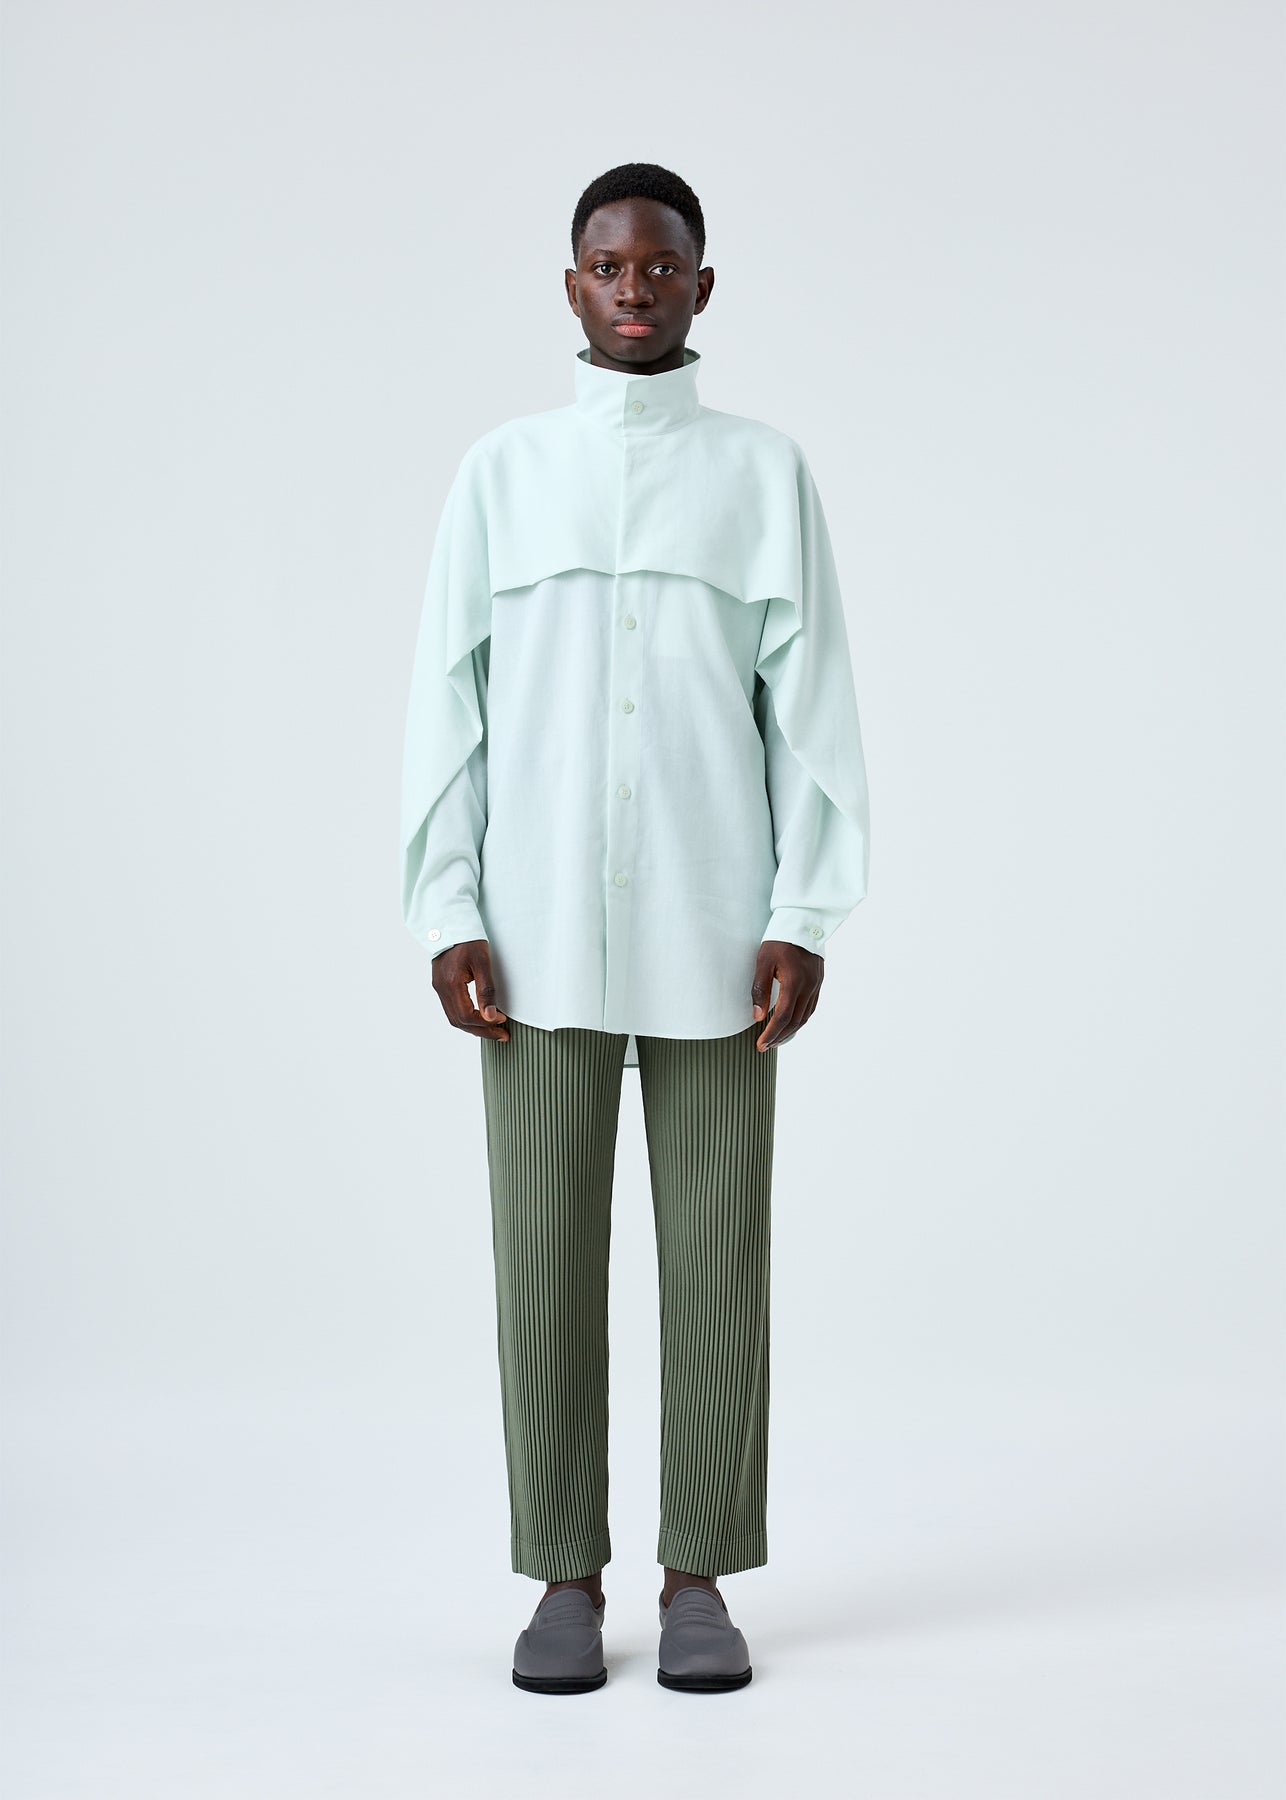 COLOR PLEATS PANTS | The official ISSEY MIYAKE ONLINE STORE | ISSEY MIYAKE  USA